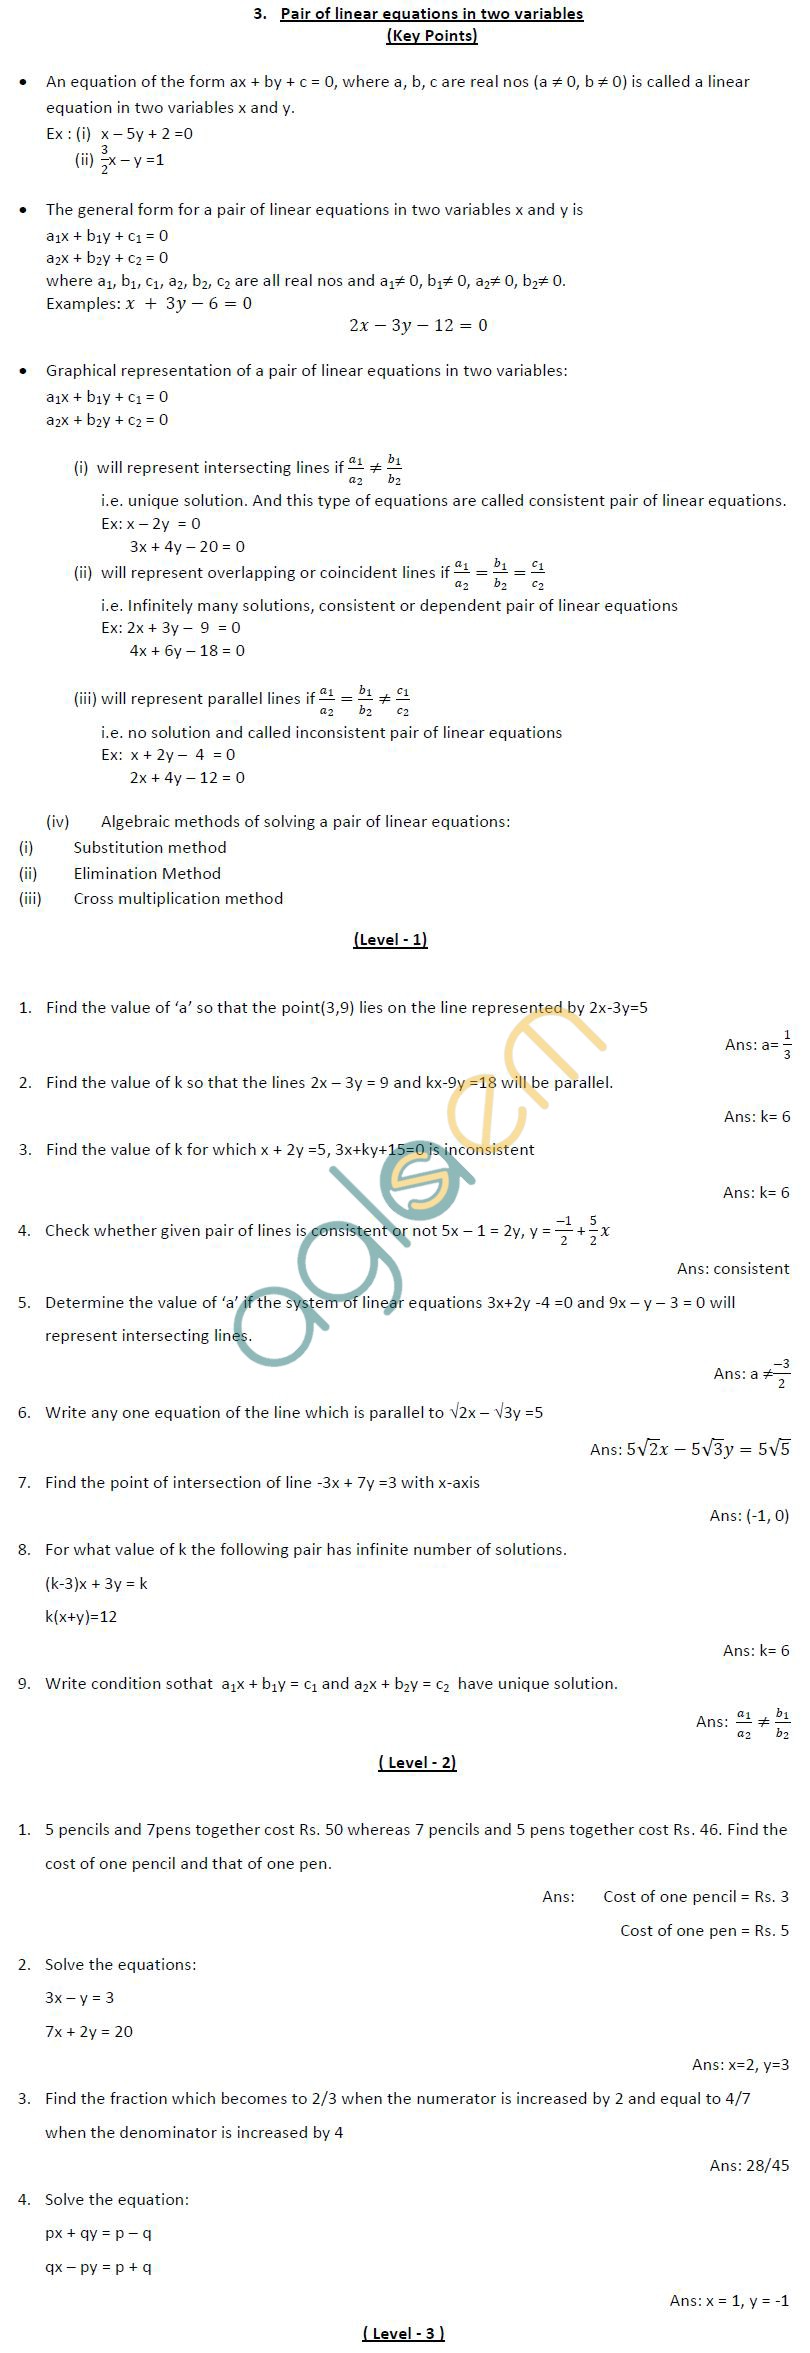 CBSE Class X: Maths - A pair of linear equations in two variables